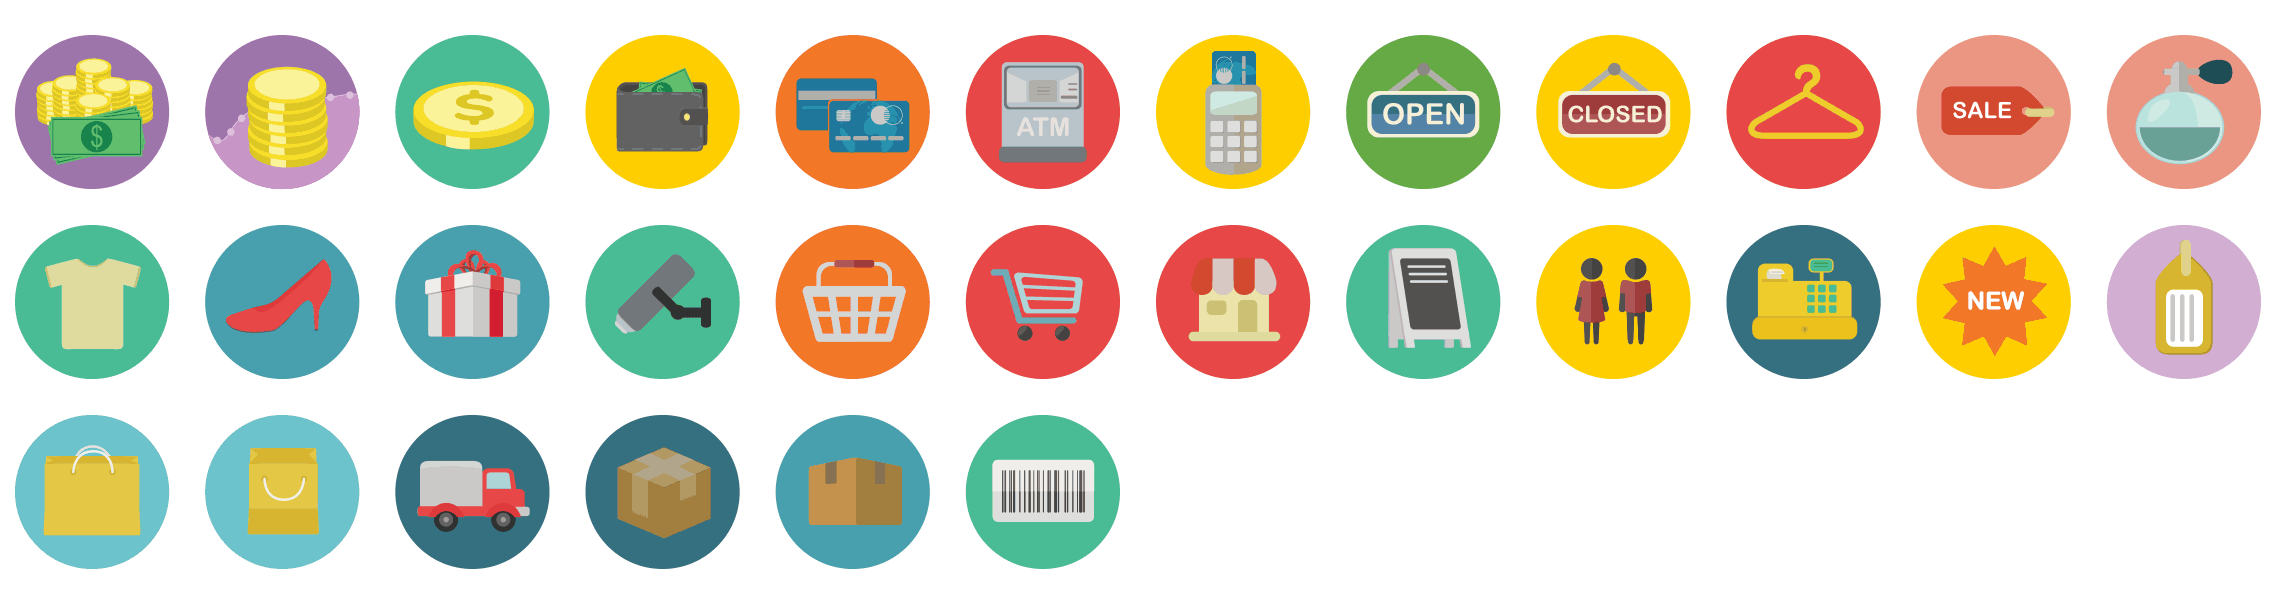 shopping-flat-icons-vol-1-preview